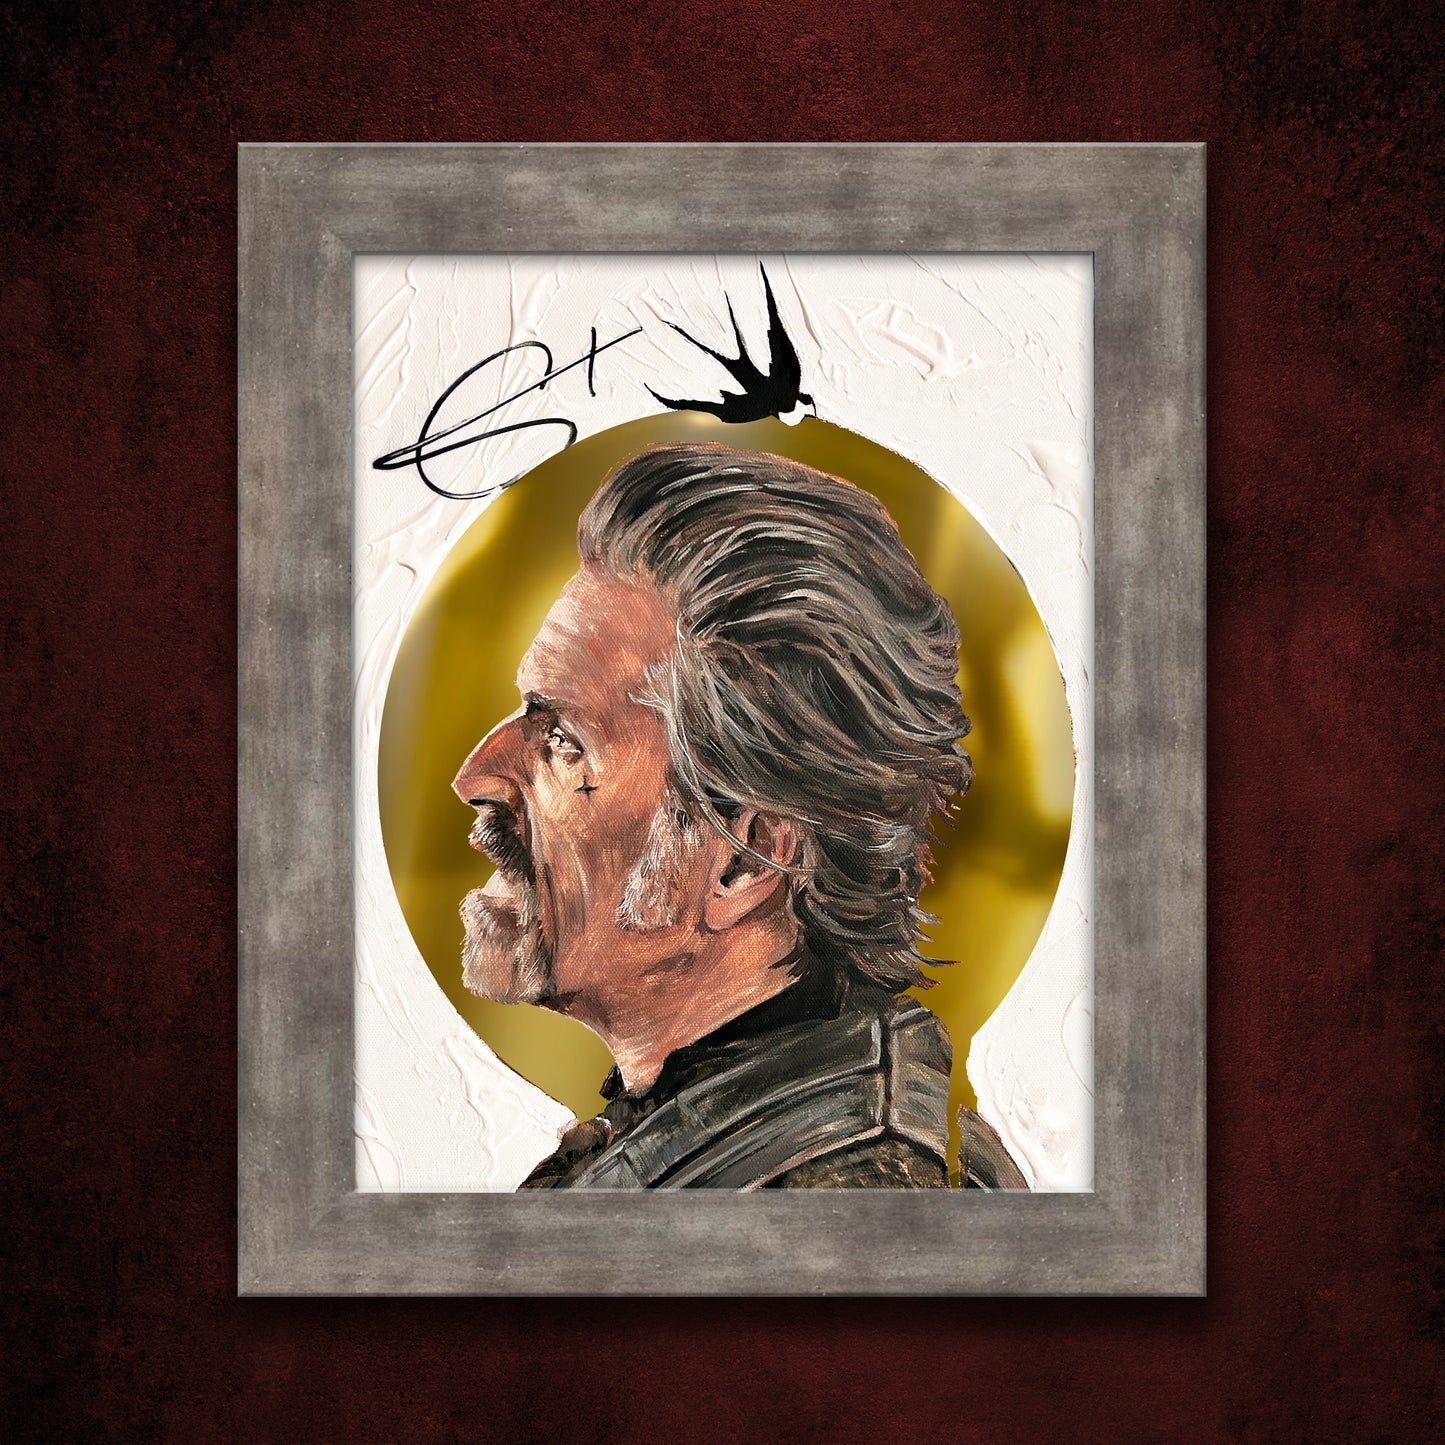 A framed lithograph against a dark red wall. The lithograph depicts the character Izzy from Our Flag Means Death, and is autographed by the actor Con O'Neill. The character's head is surrounded by a golden halo against a white background.